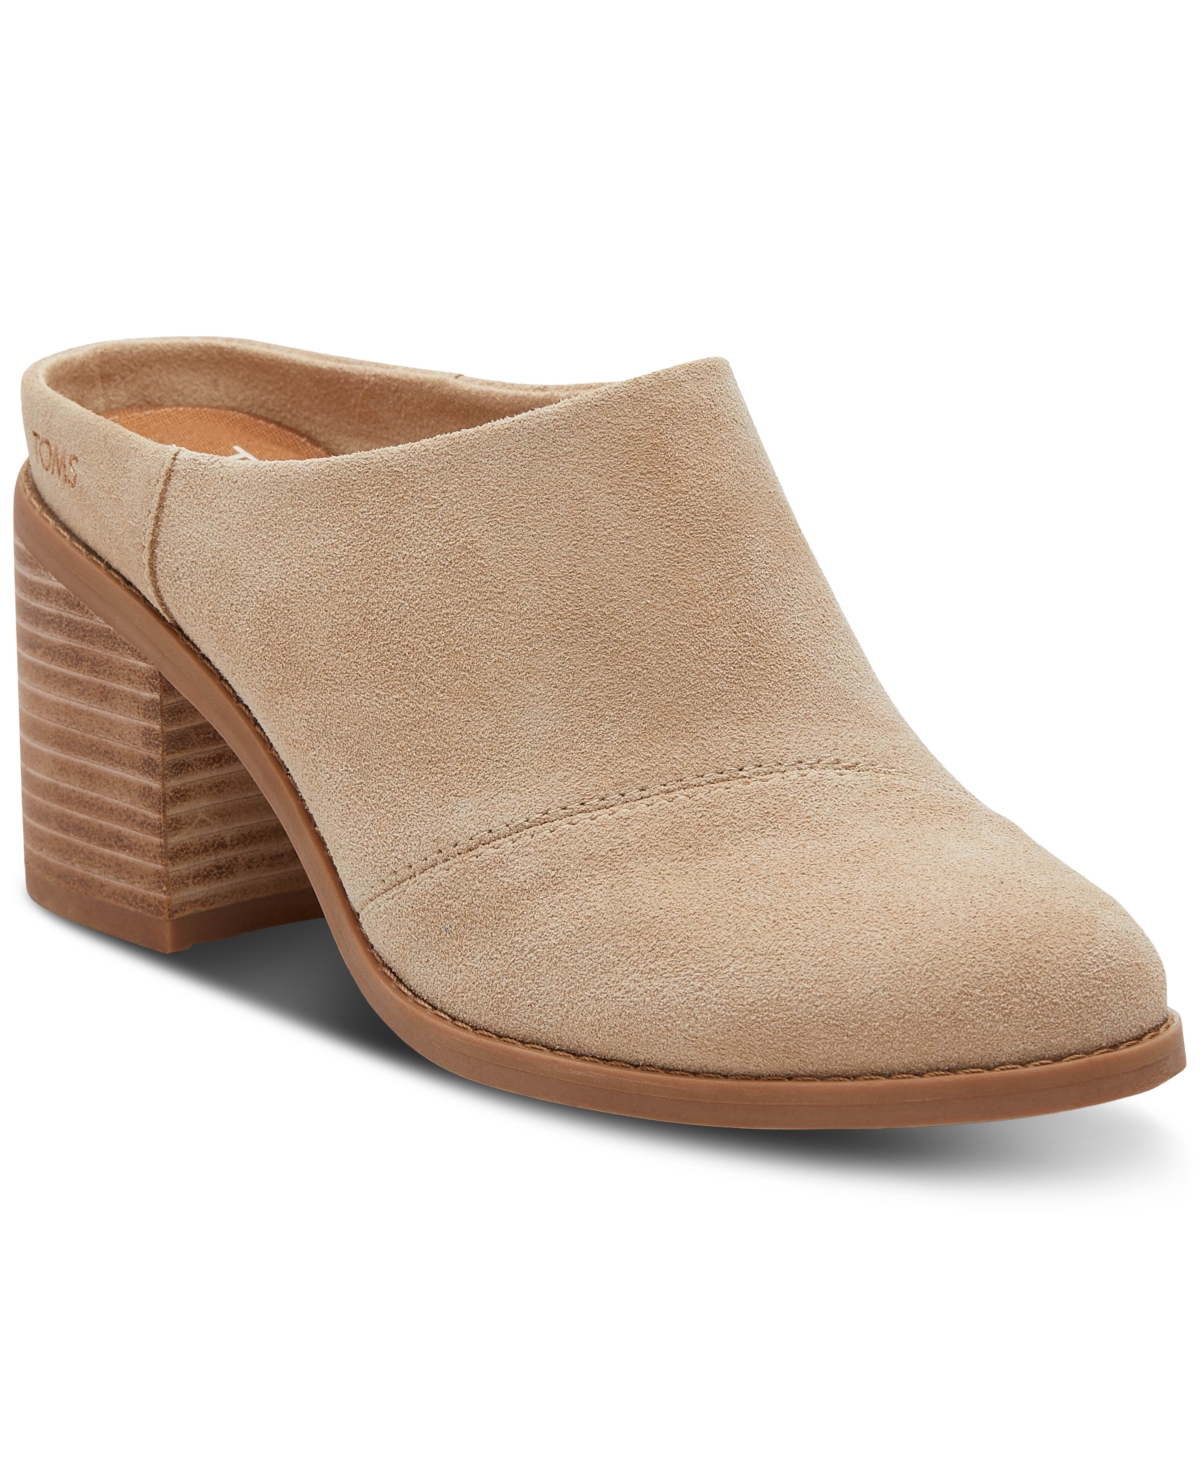 Women's Evelyn Stacked-Heel Mules - Oatmeal Suede